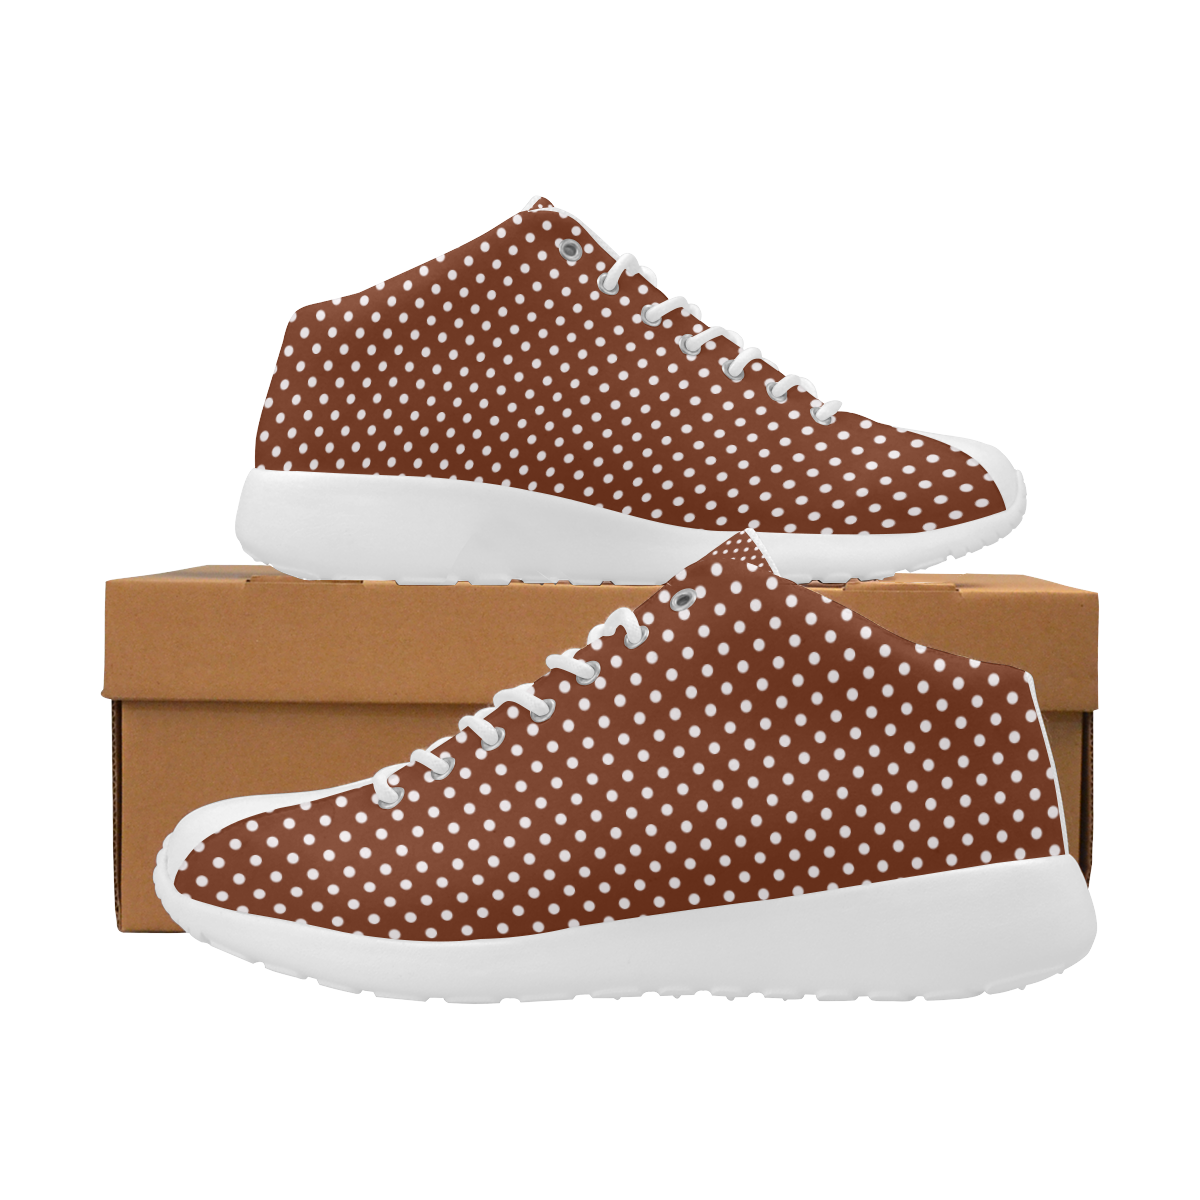 Brown polka dots Women's Basketball Training Shoes/Large Size (Model 47502)